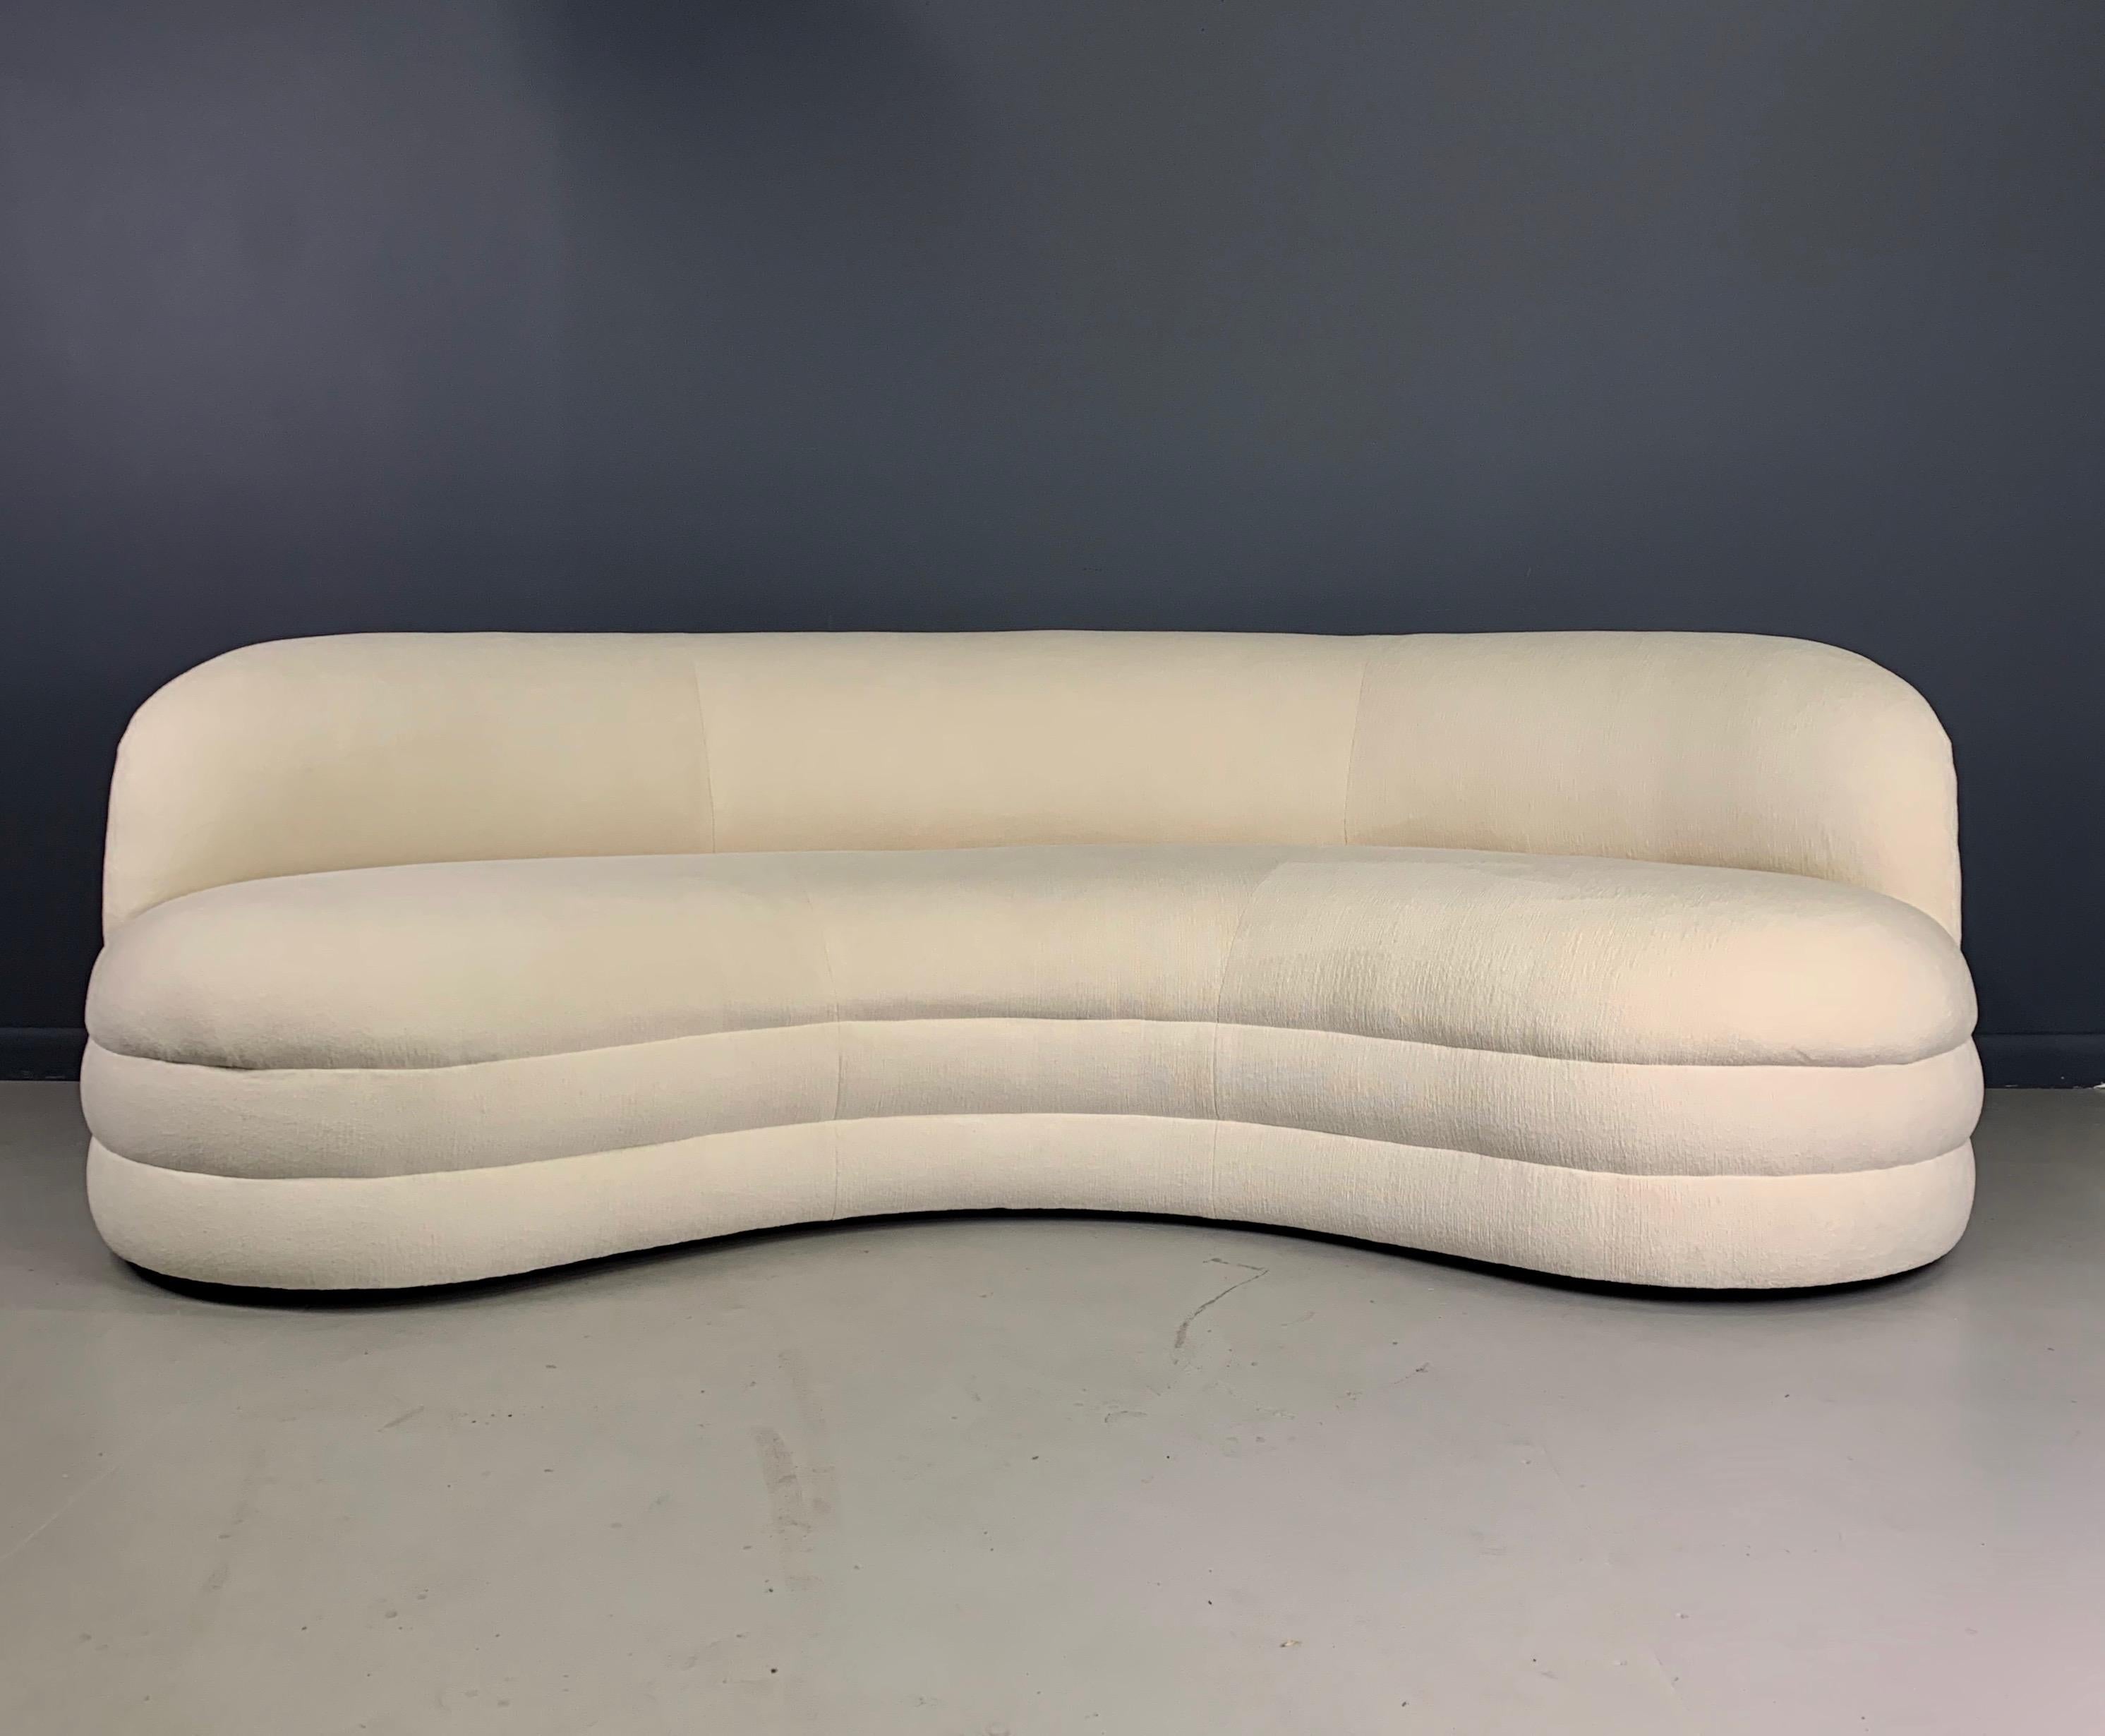 A unique kidney-shaped sofa, circa 1970s. The sofa features a nice sculptural modern design, with a curved arched back and a plinth base. The sofa has been redone from top to bottom with a beautiful textured white velvet.

Measures: 86